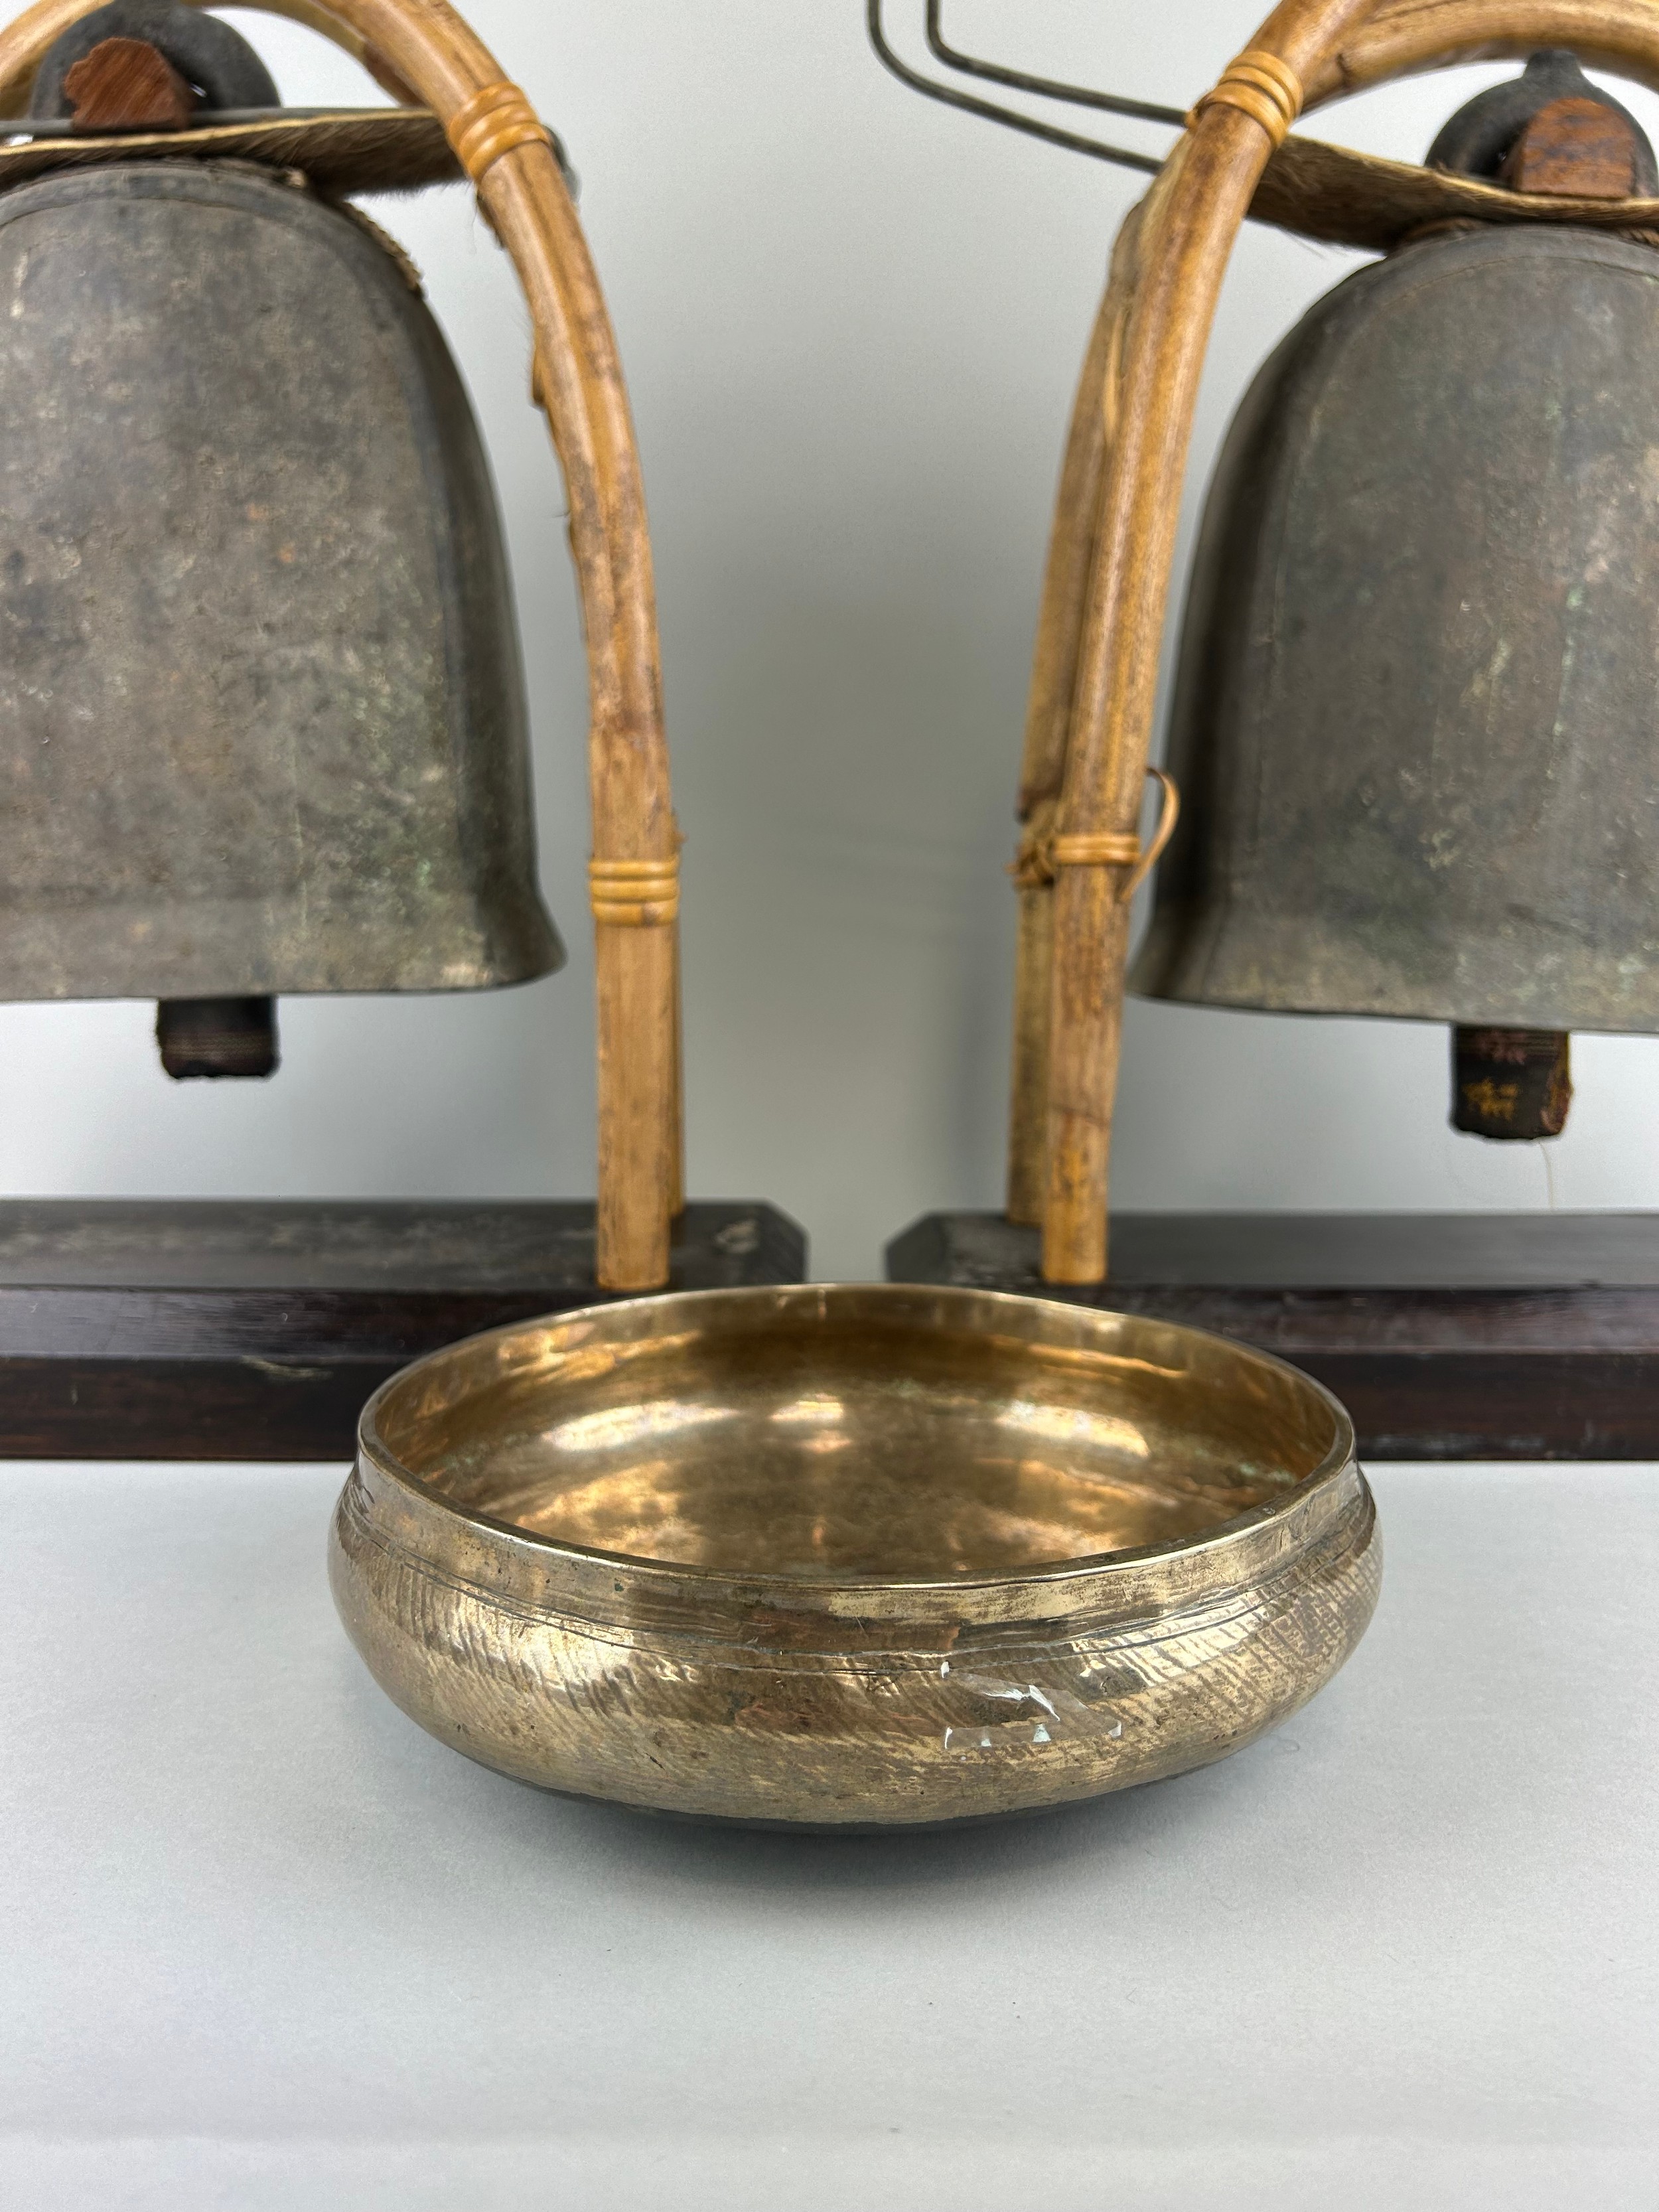 A PAIR OF BUDDHIST BRONZE ELEPHANT BELLS OR GONGS AND A SINGING BOWL (3), Each gong 43cm x 38cm - Image 3 of 5